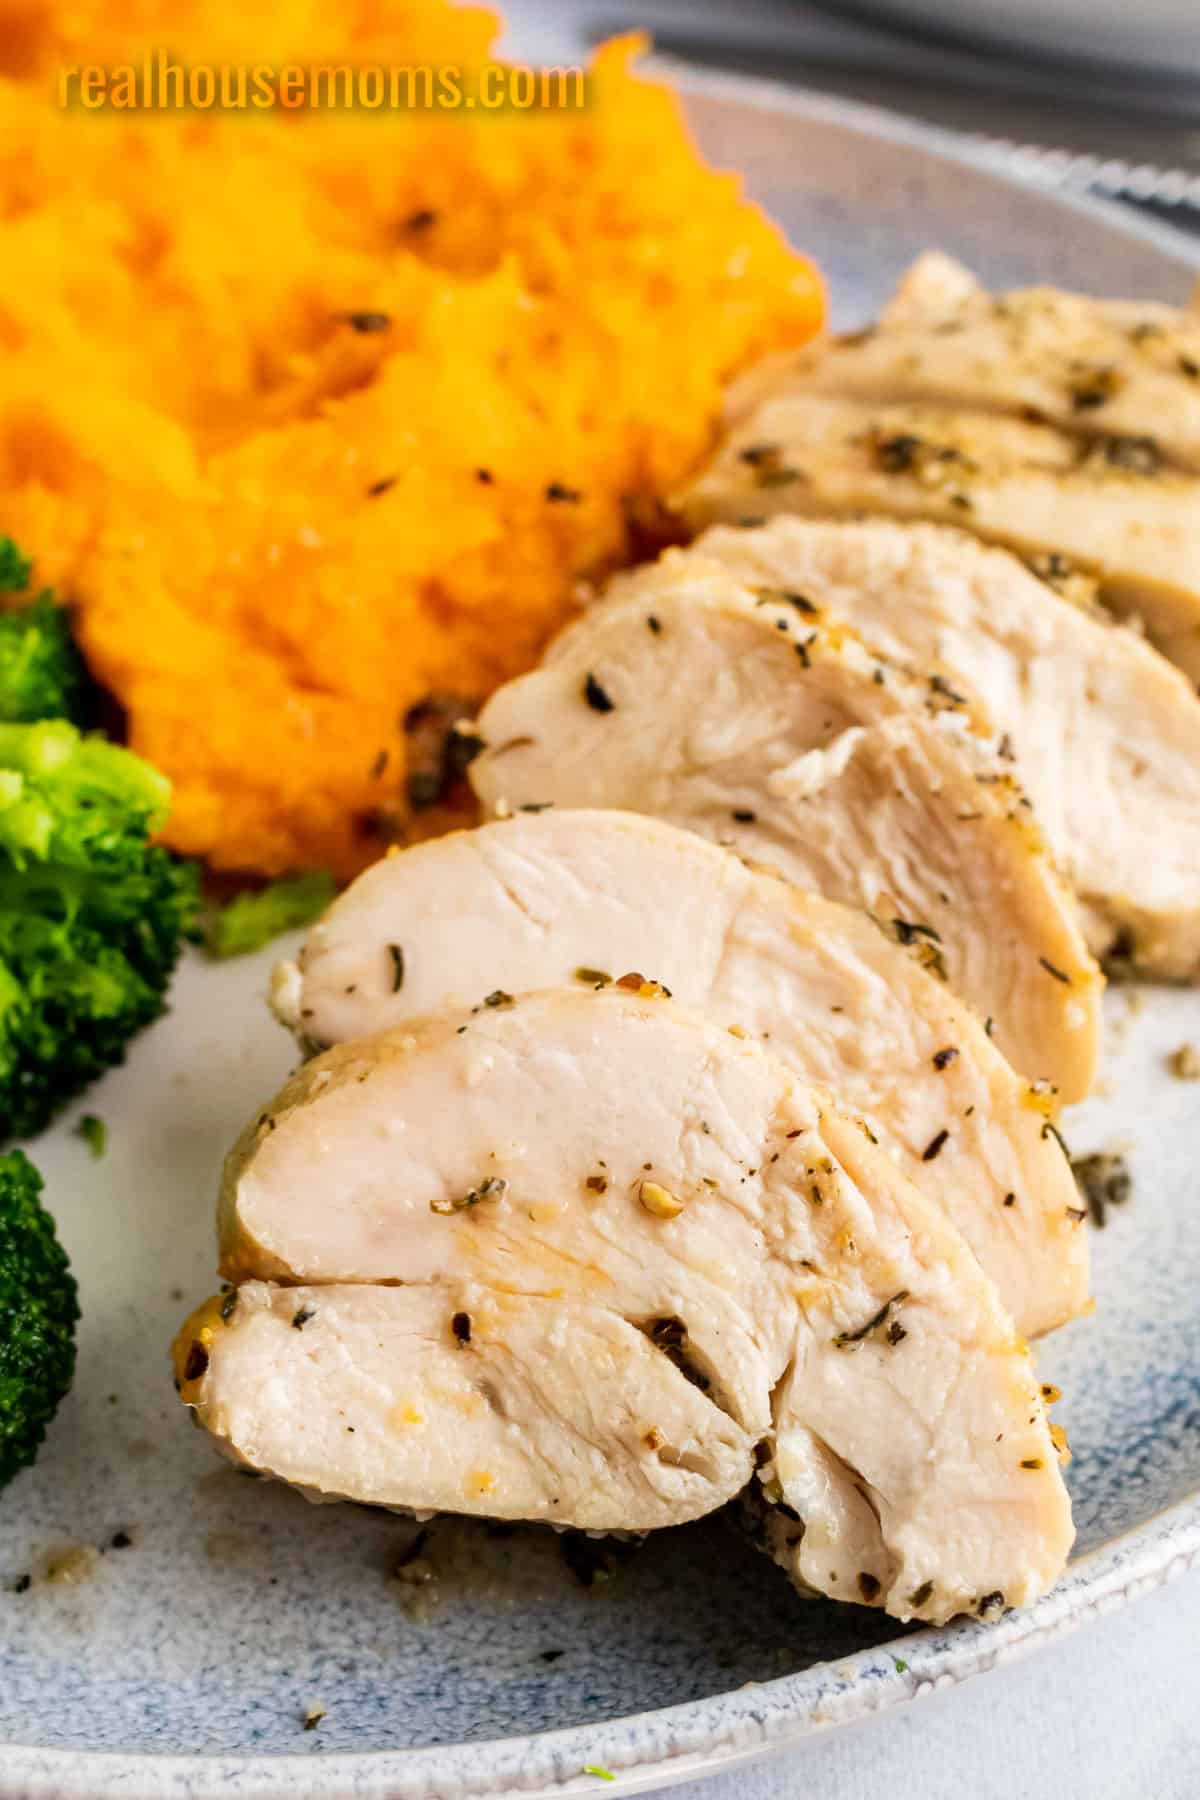 sliced baked chicken breast on a plate with mashed sweet potatoes and borccoli